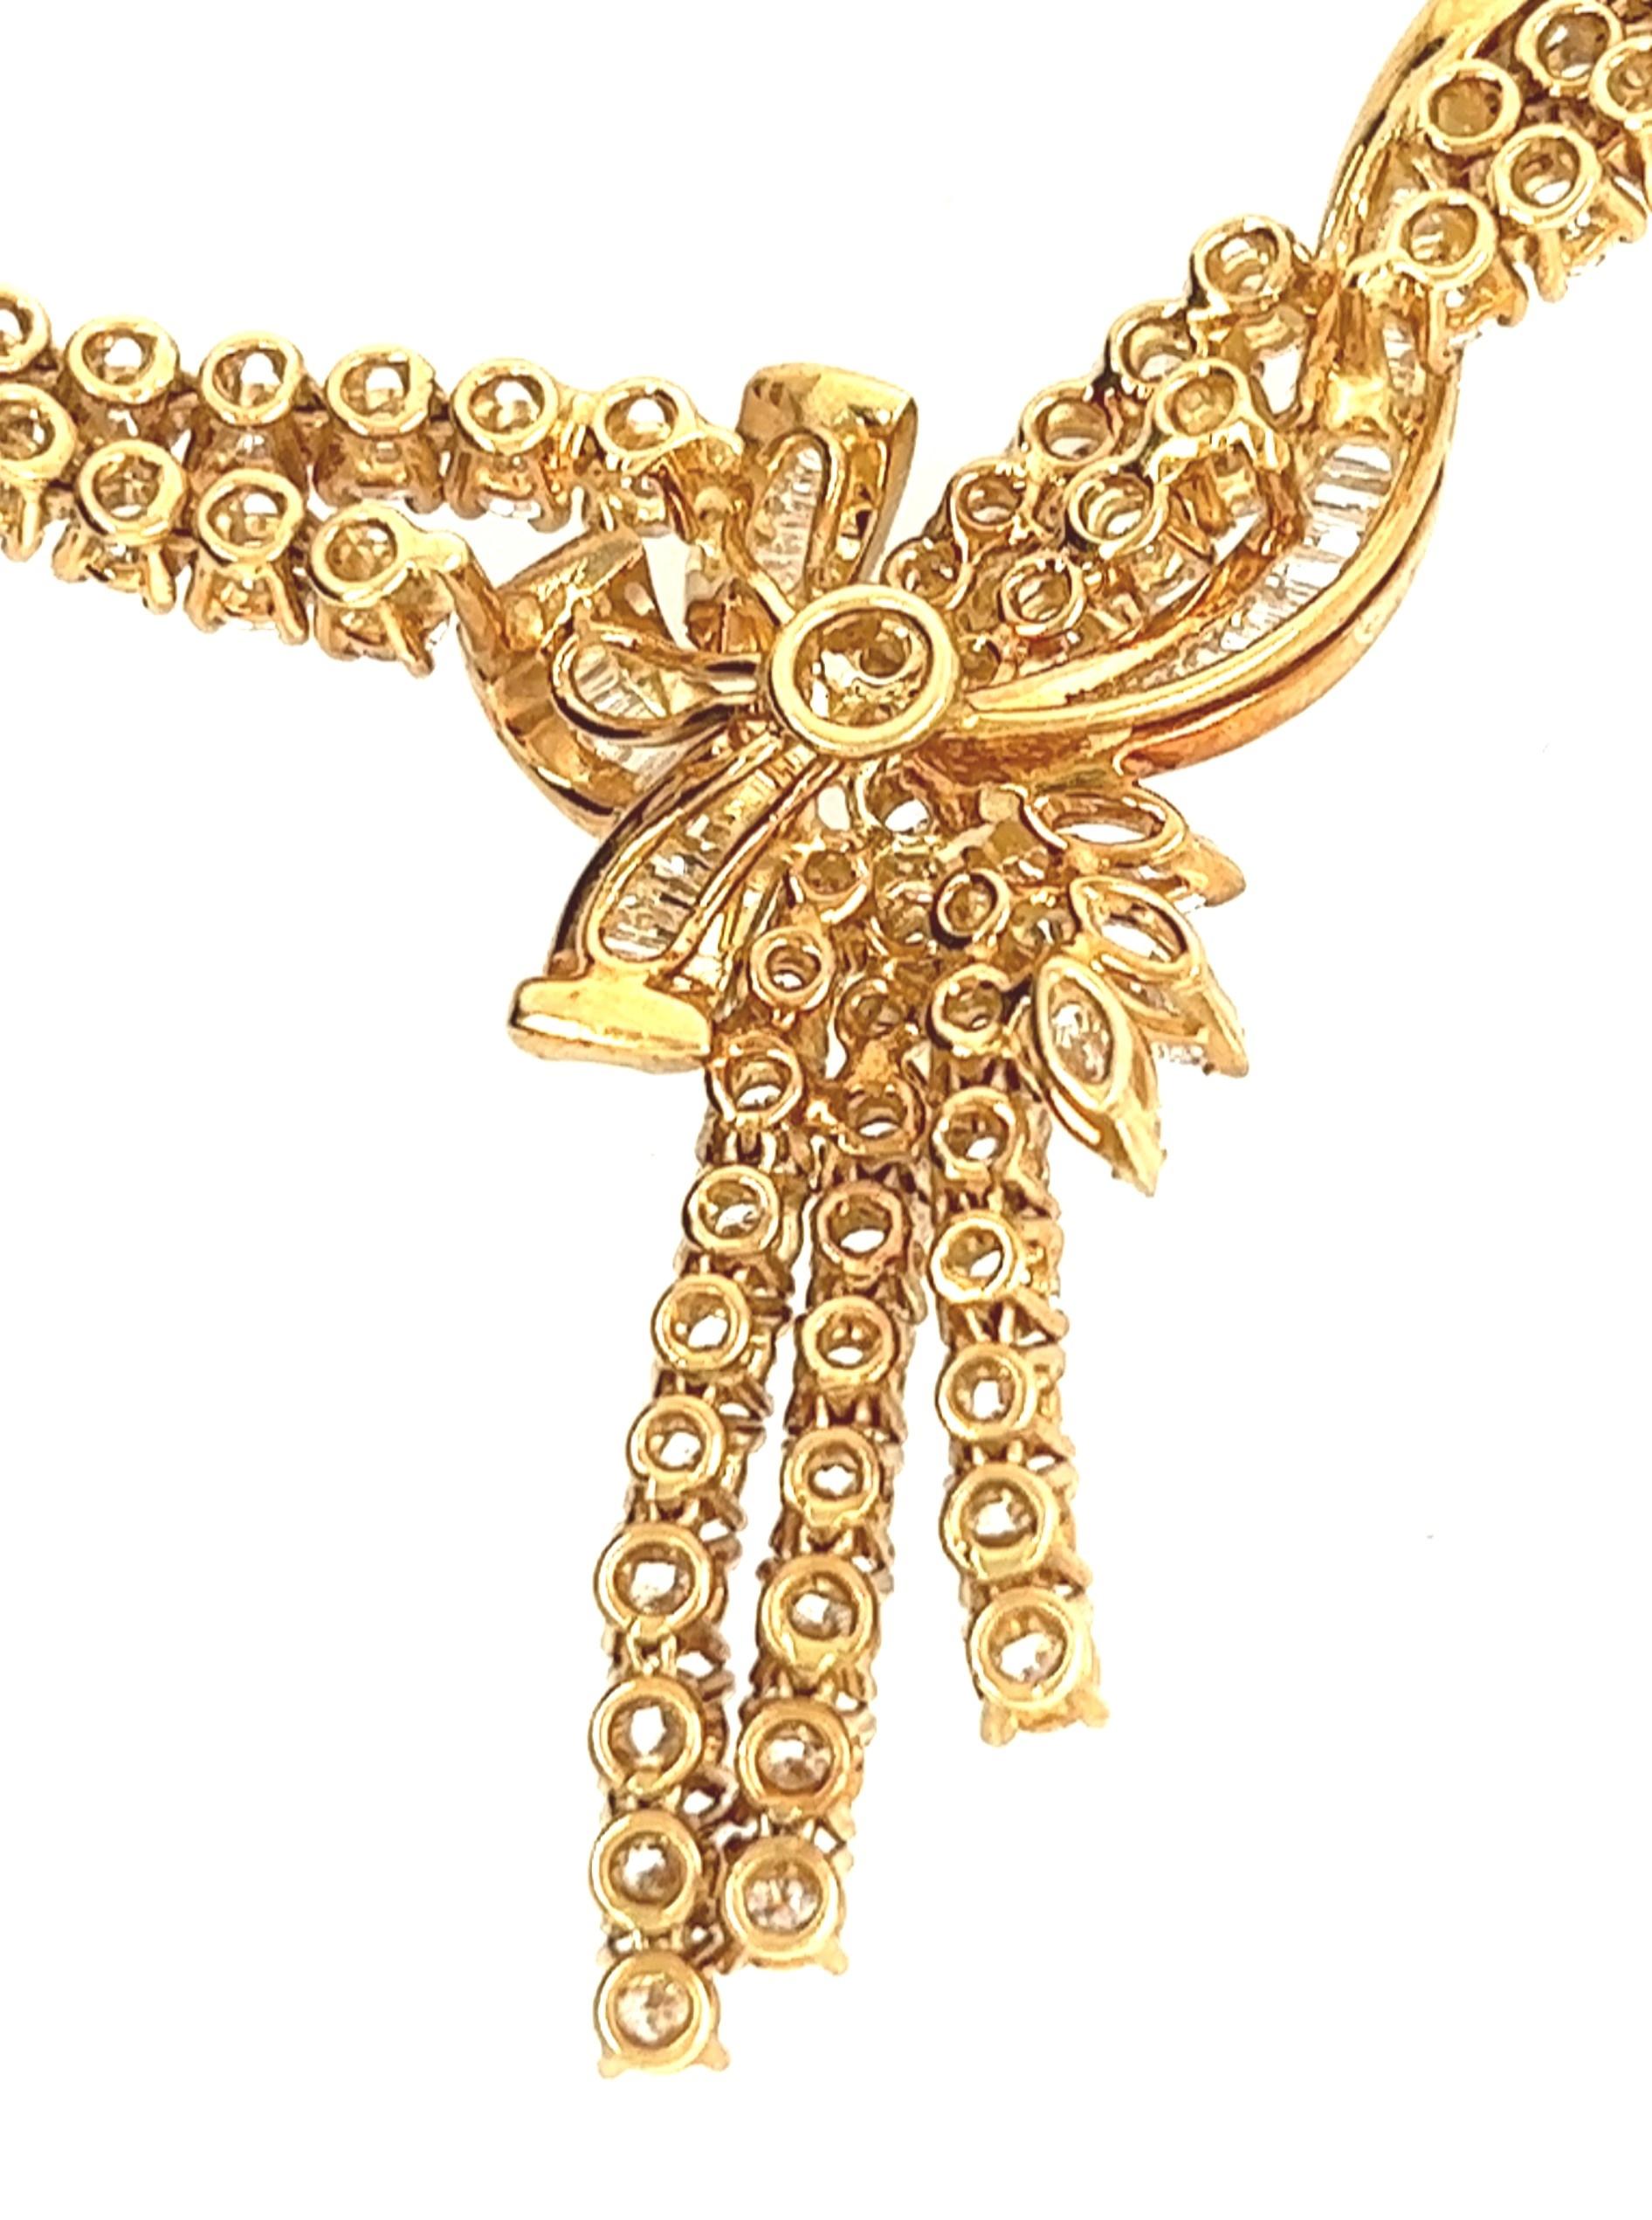 18kt yellow gold necklace 16 inches long containing approximately 6.16 carats of H-I color/ VS2-SI1 clarity diamonds. 

The necklace contains a center portion of almost 4 inches of diamonds in two rows. The center of the diamond portion contains a